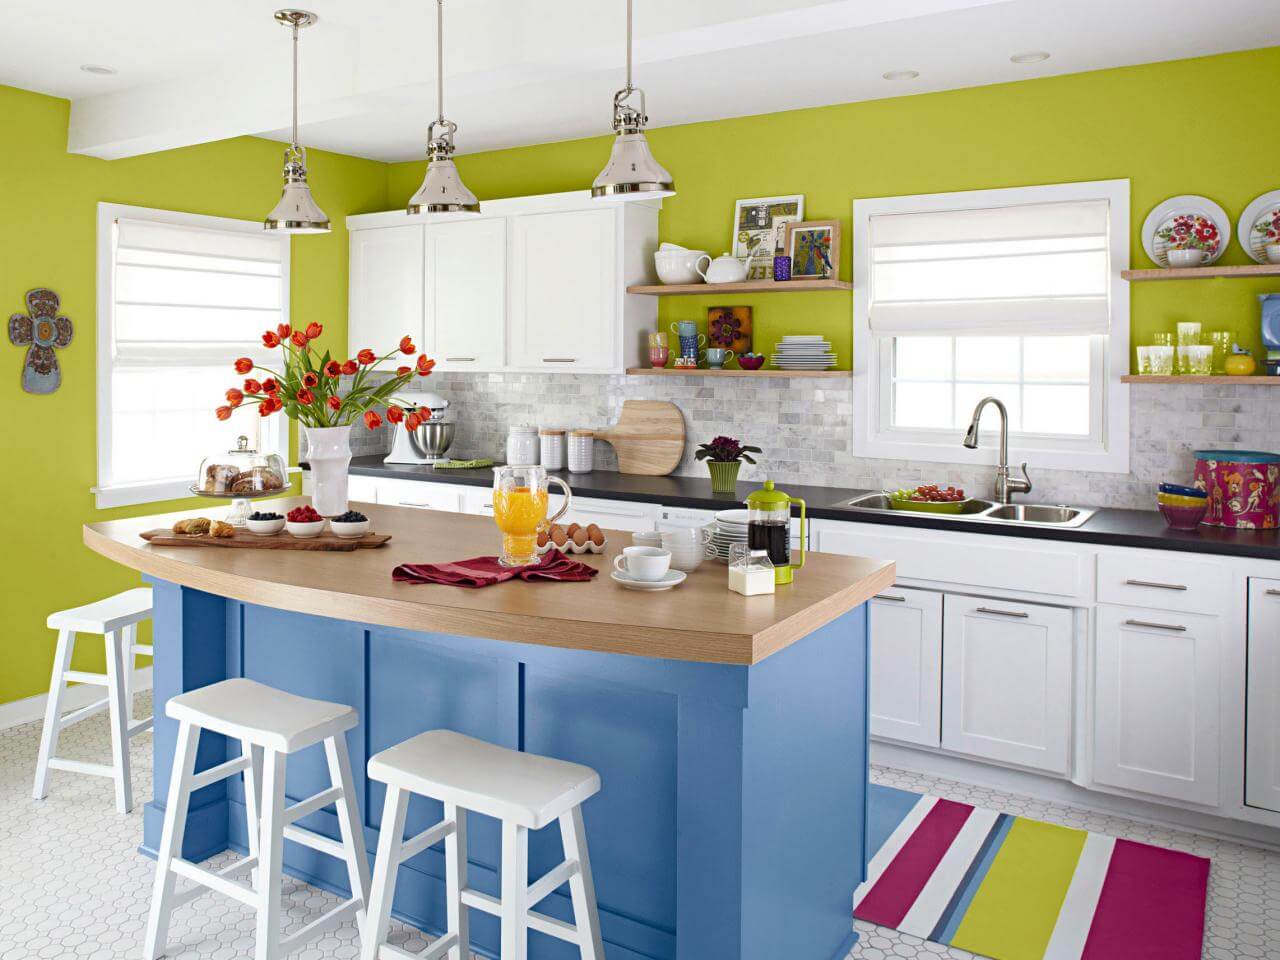 Large island kitchen inspired by Beach Cottage 